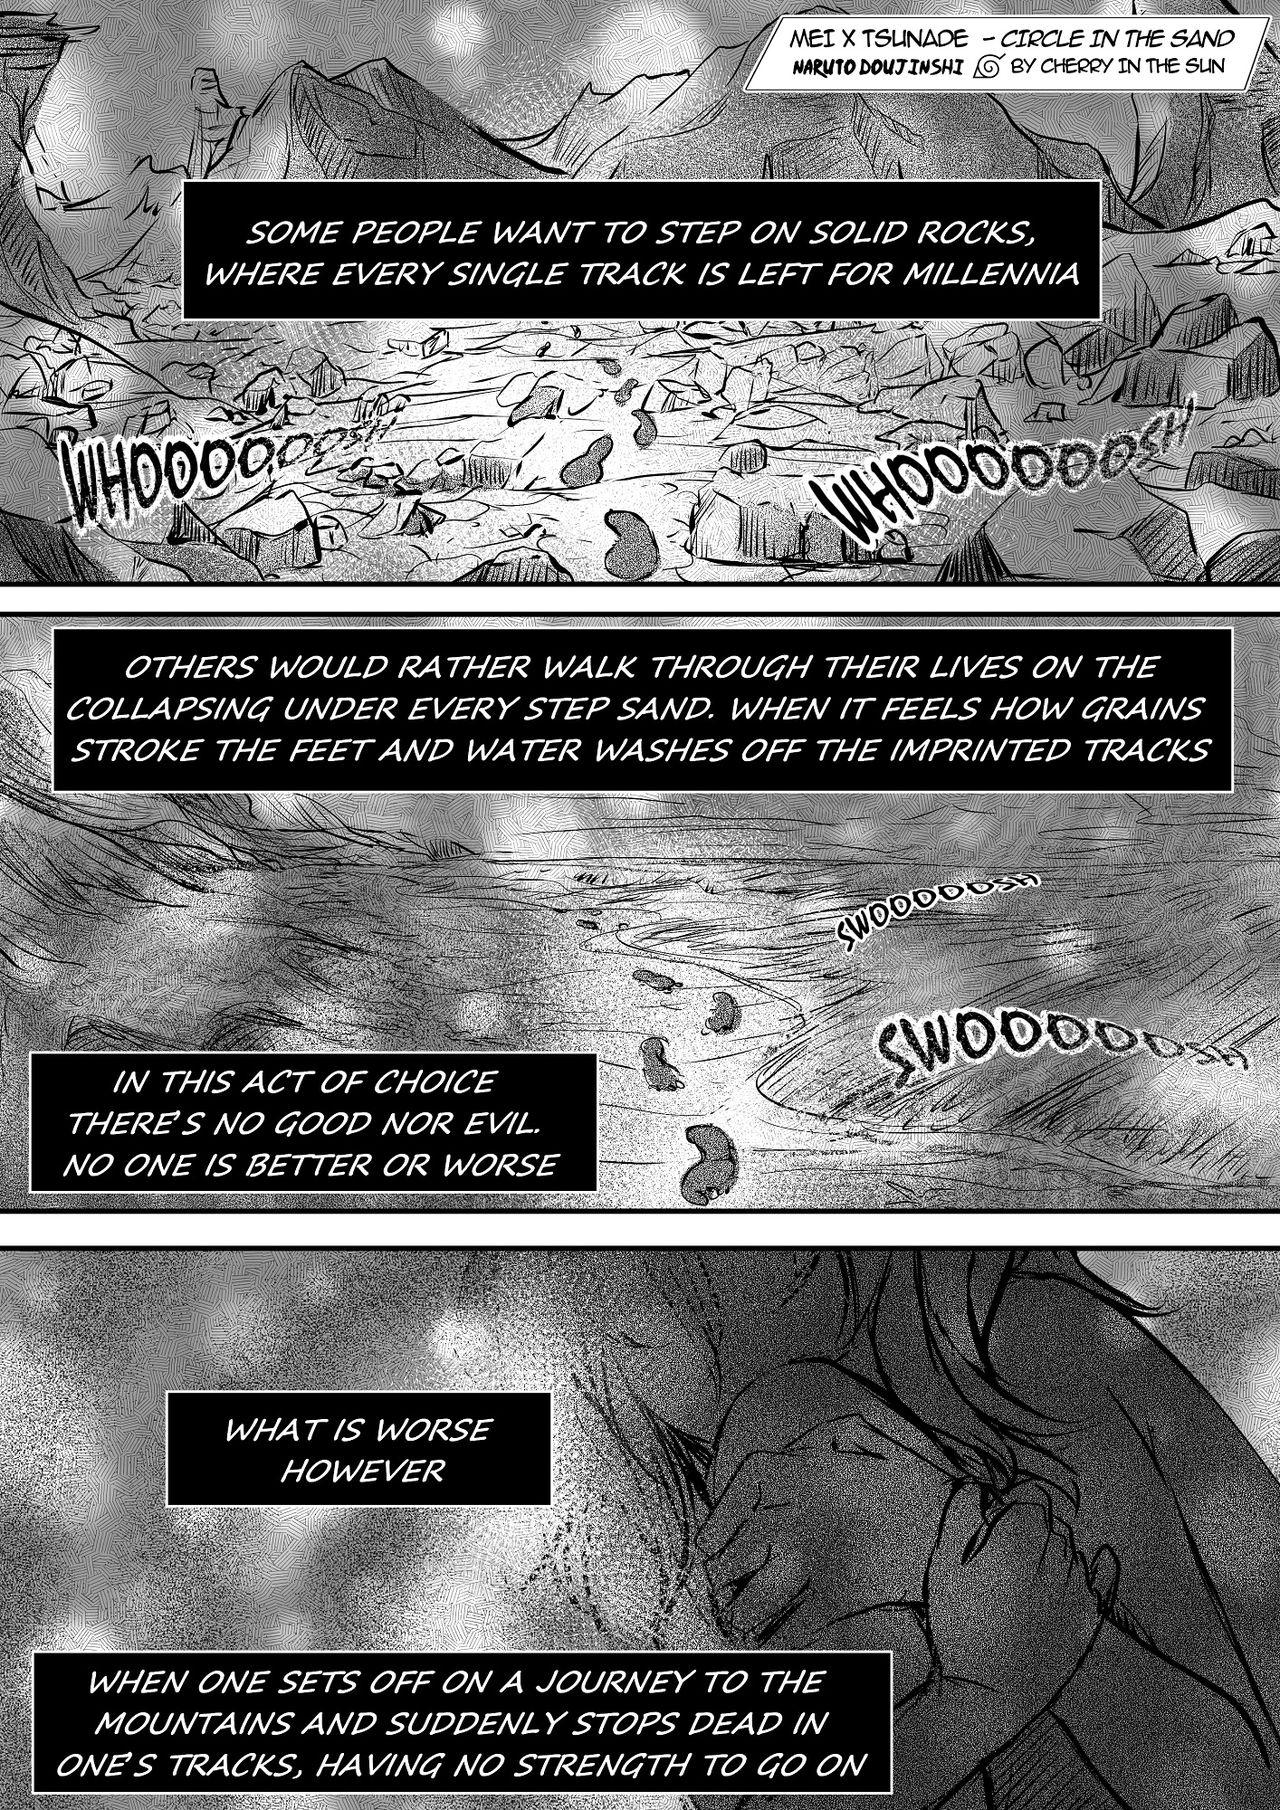 Youporn Circle in the Sand - Naruto Strapon - Page 2